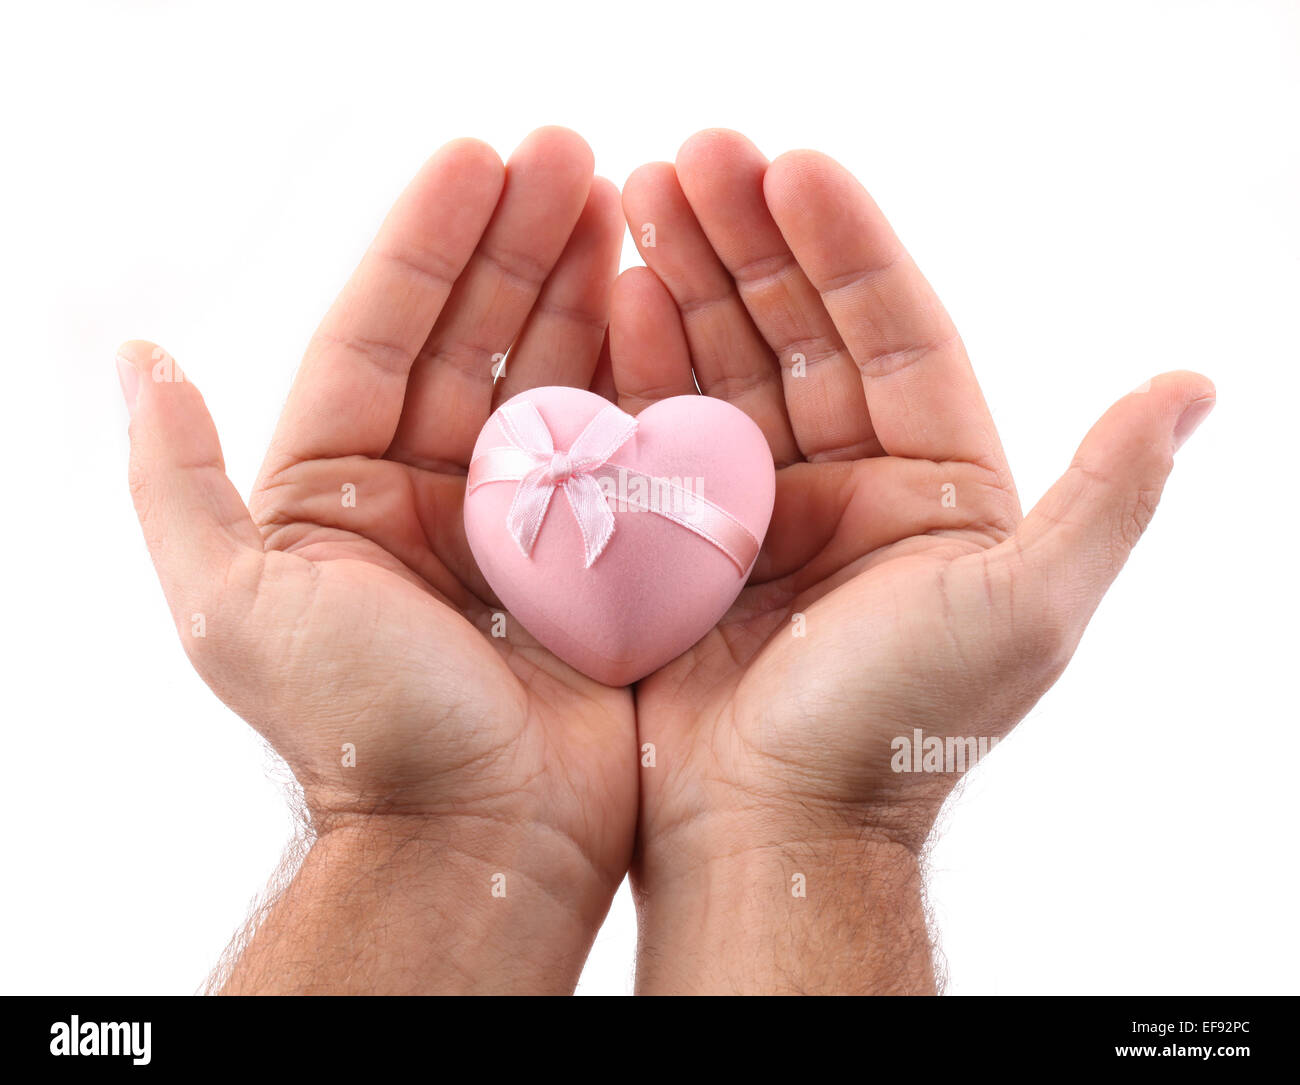 Pink heart in male hands on a white background. Stock Photo